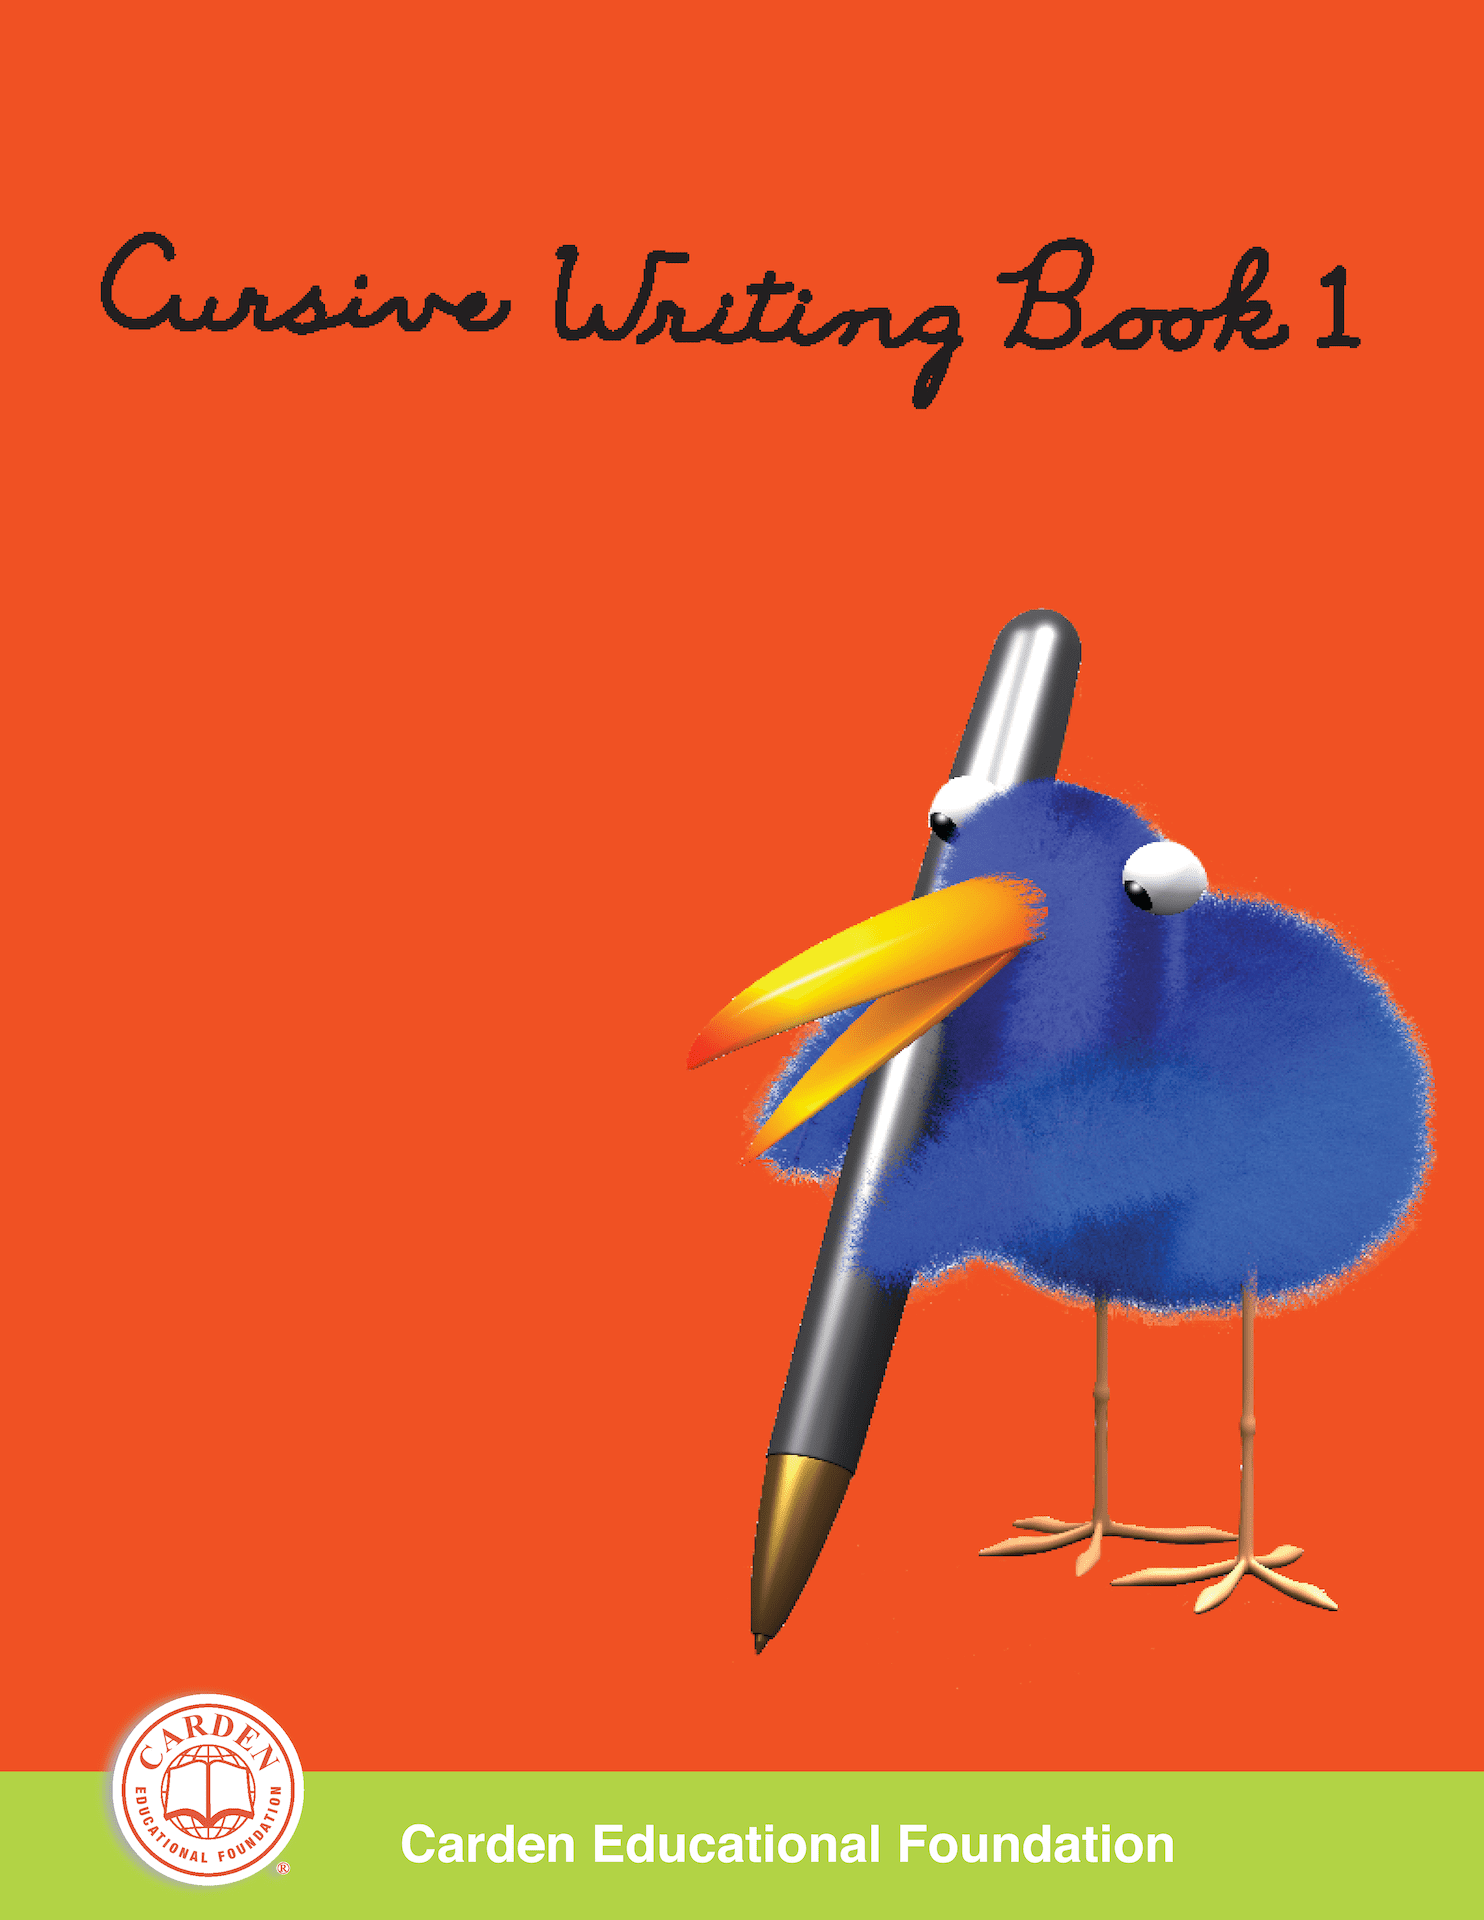 cursive-writing-book-1-the-carden-educational-foundation